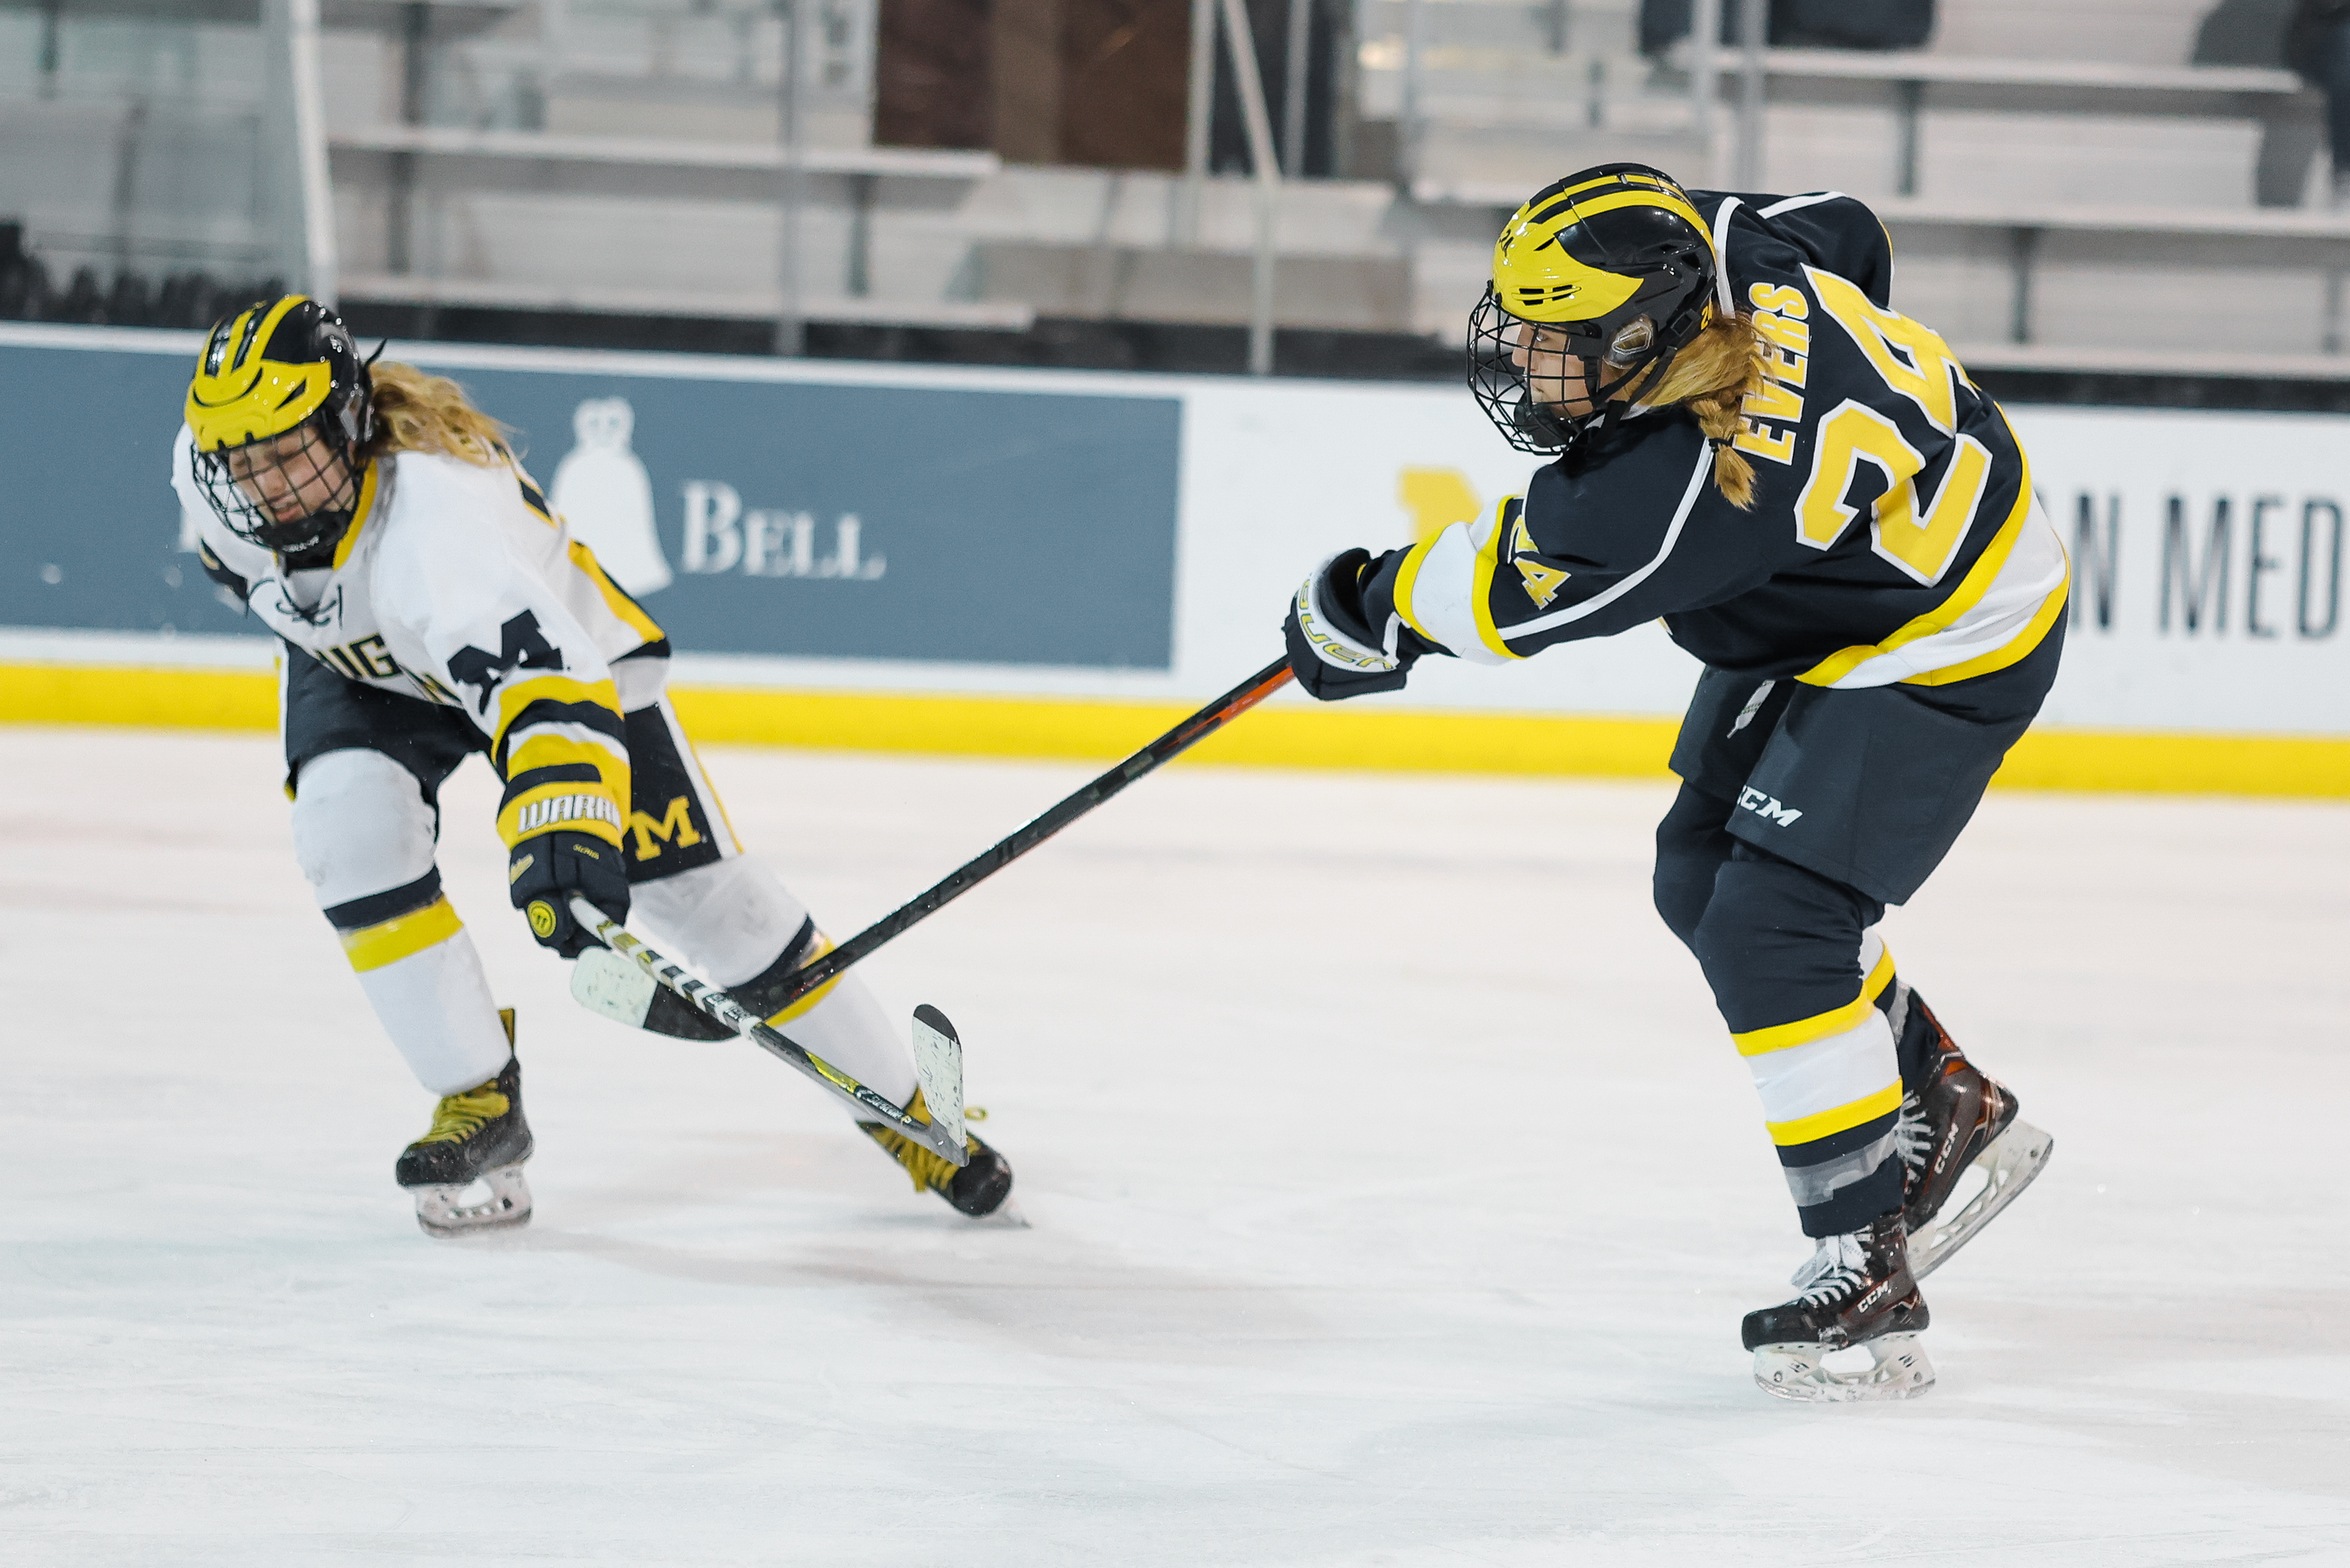 Tournament Hopes Stay Alive, UM-Dearborn Takes Down No. 9 Michigan 2-1